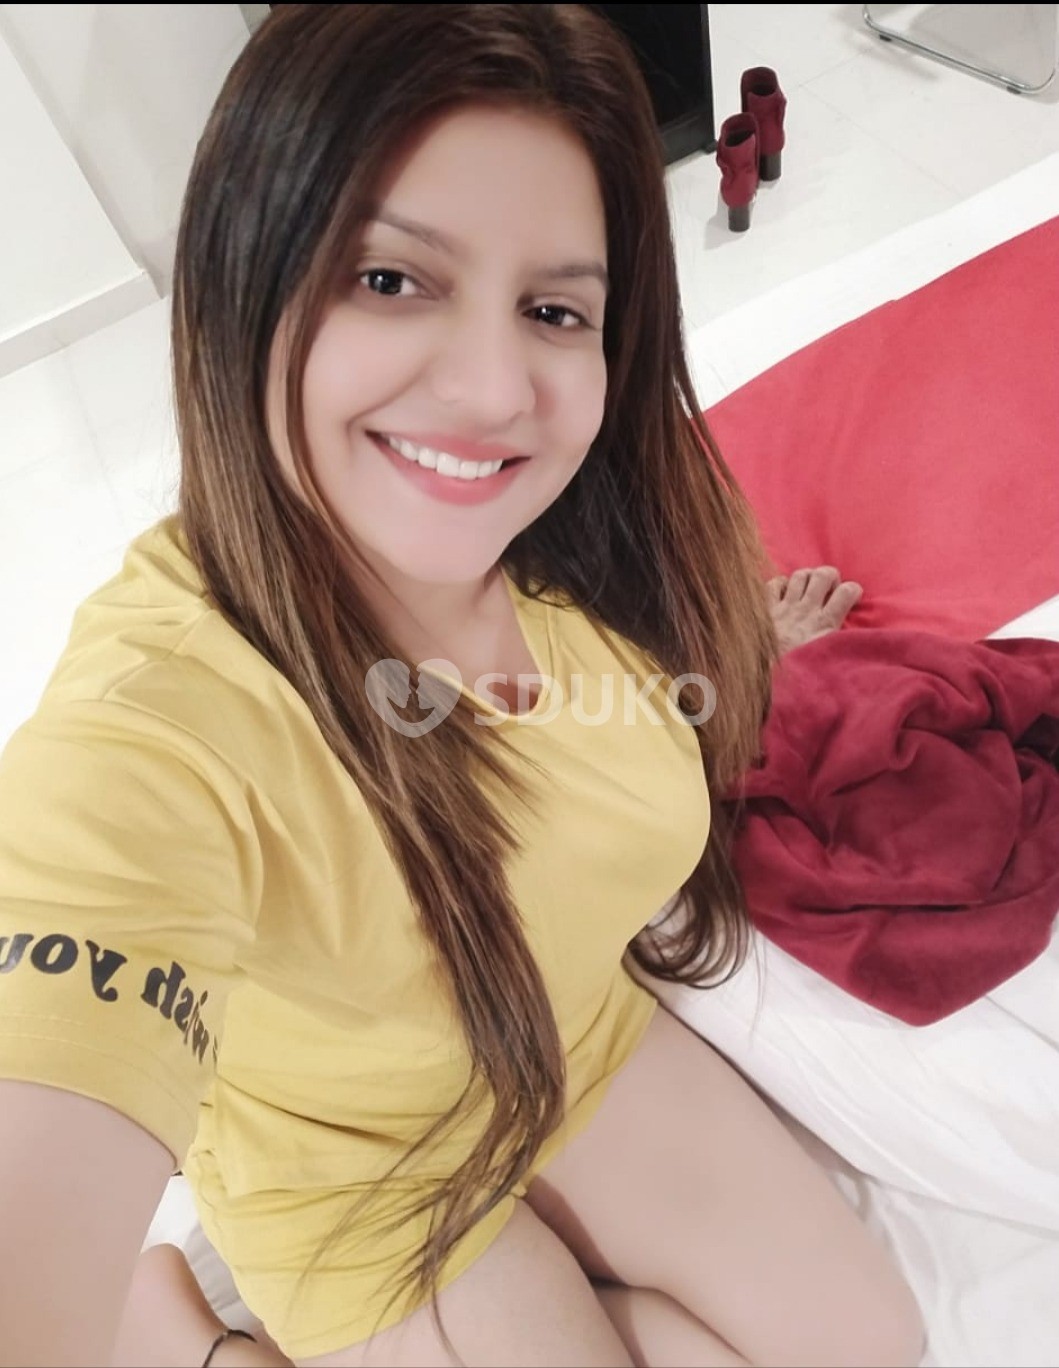 SARJAPUR HOT 💋👅 GIRLS AVAILABLE ANAL ORAL BLOWJOB AVAILABLE